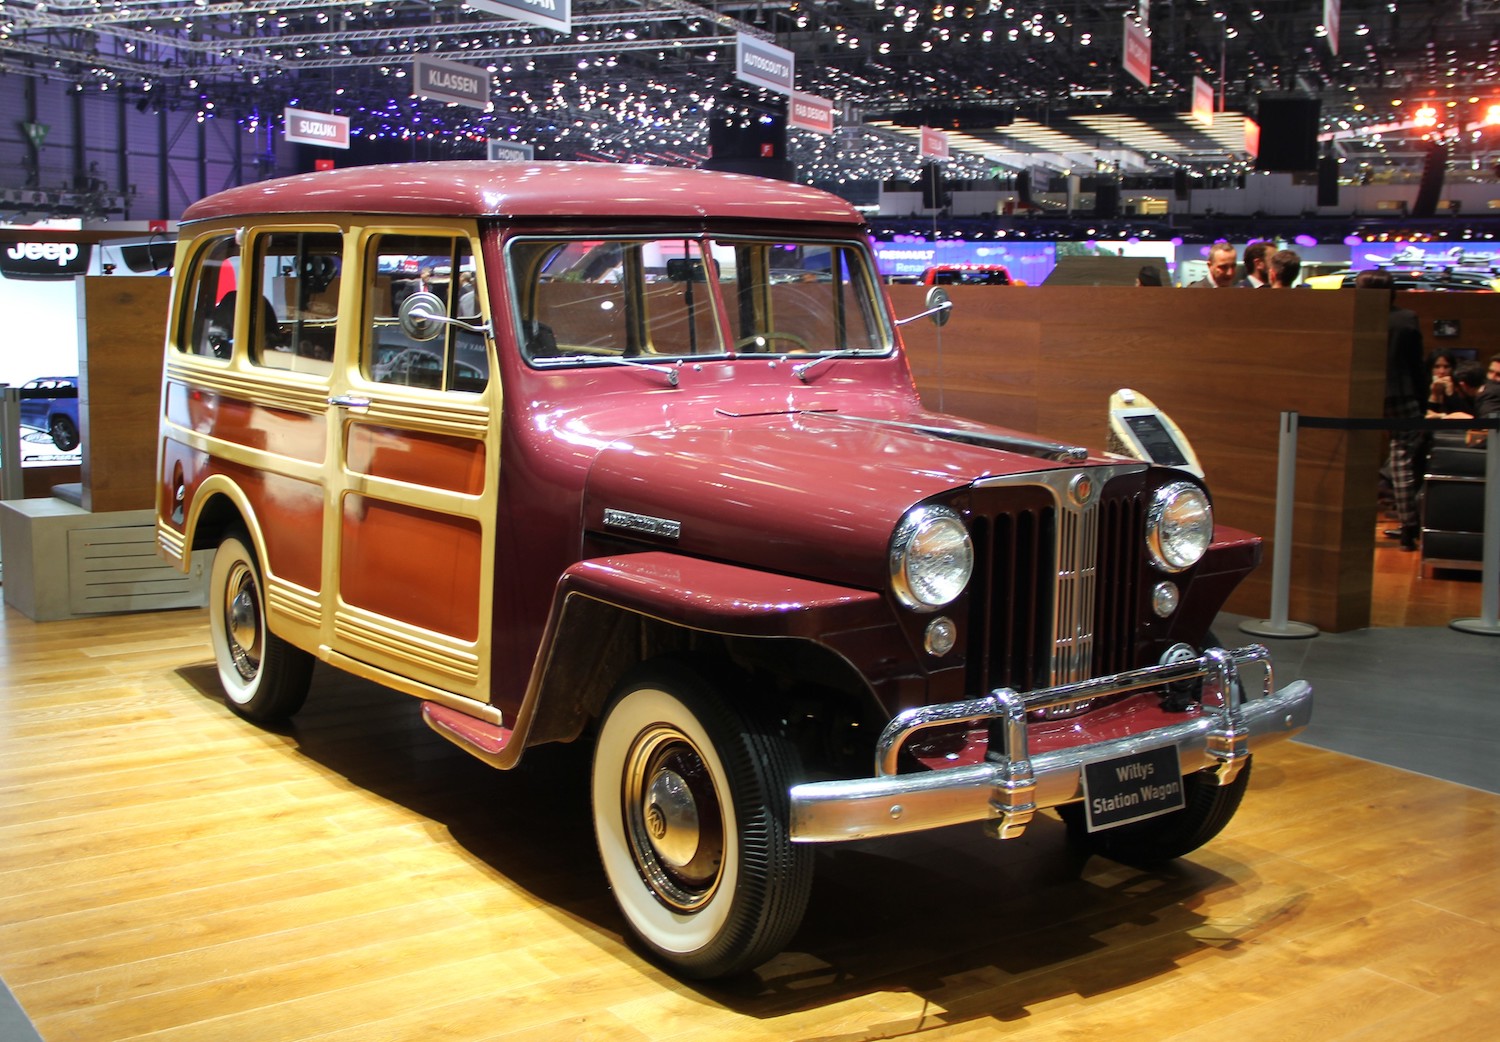 The first factory 4WD station wagon was the 1949 Willys Jeep. SUV stands for sport utility vehicle. The difference between and SUV and a crossover (CUV means crossover utility vehicle) comes down to the vehicle's construction. Both styles are available with 4WD and extra cargo space. | Fatih Erel/Anadolu Agency/Getty Images